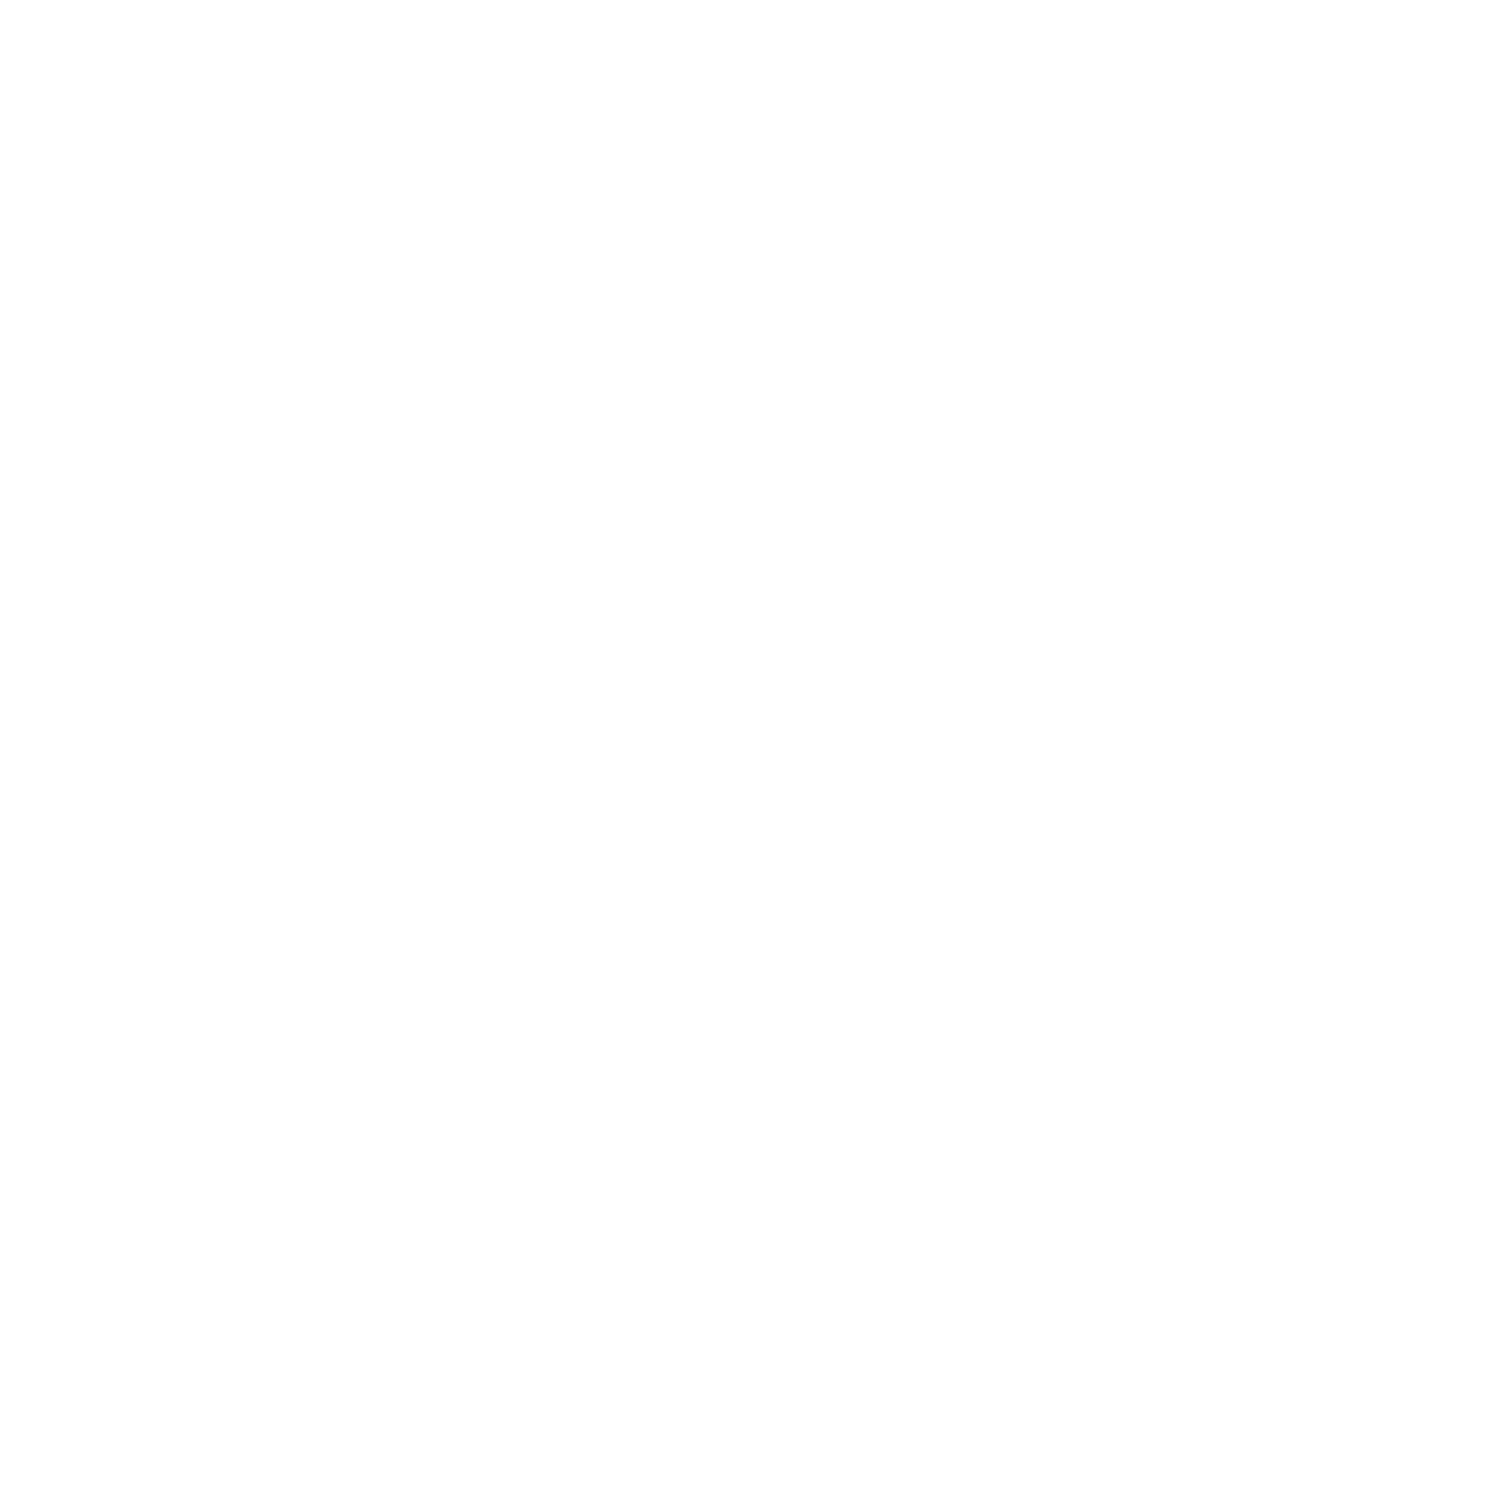 from The Akashick Records